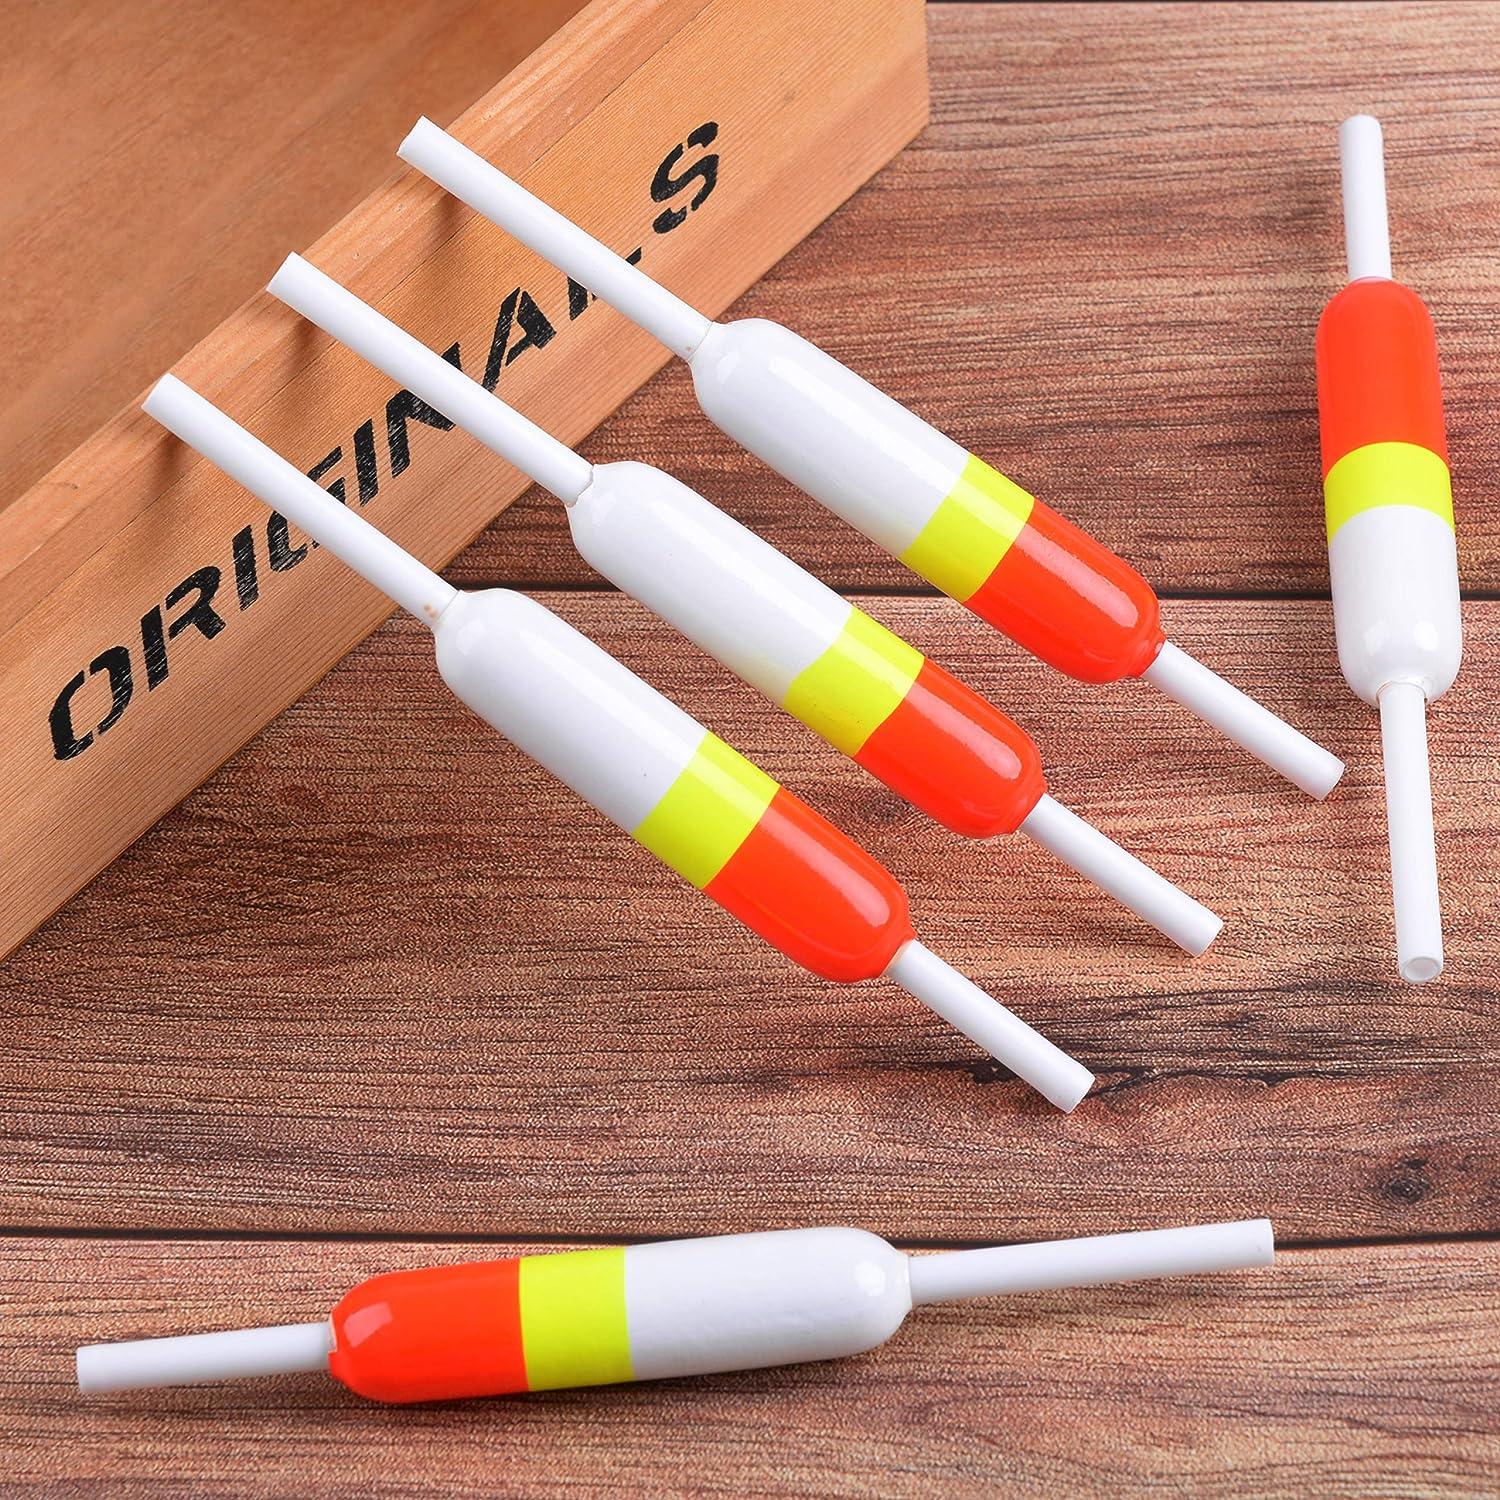 Slip Bobbers Fishing Floats Wood Spring Bobbers Floats Oval Stick Floats  for for Crappie Panfish Walleyes, 5pcs/10pcs